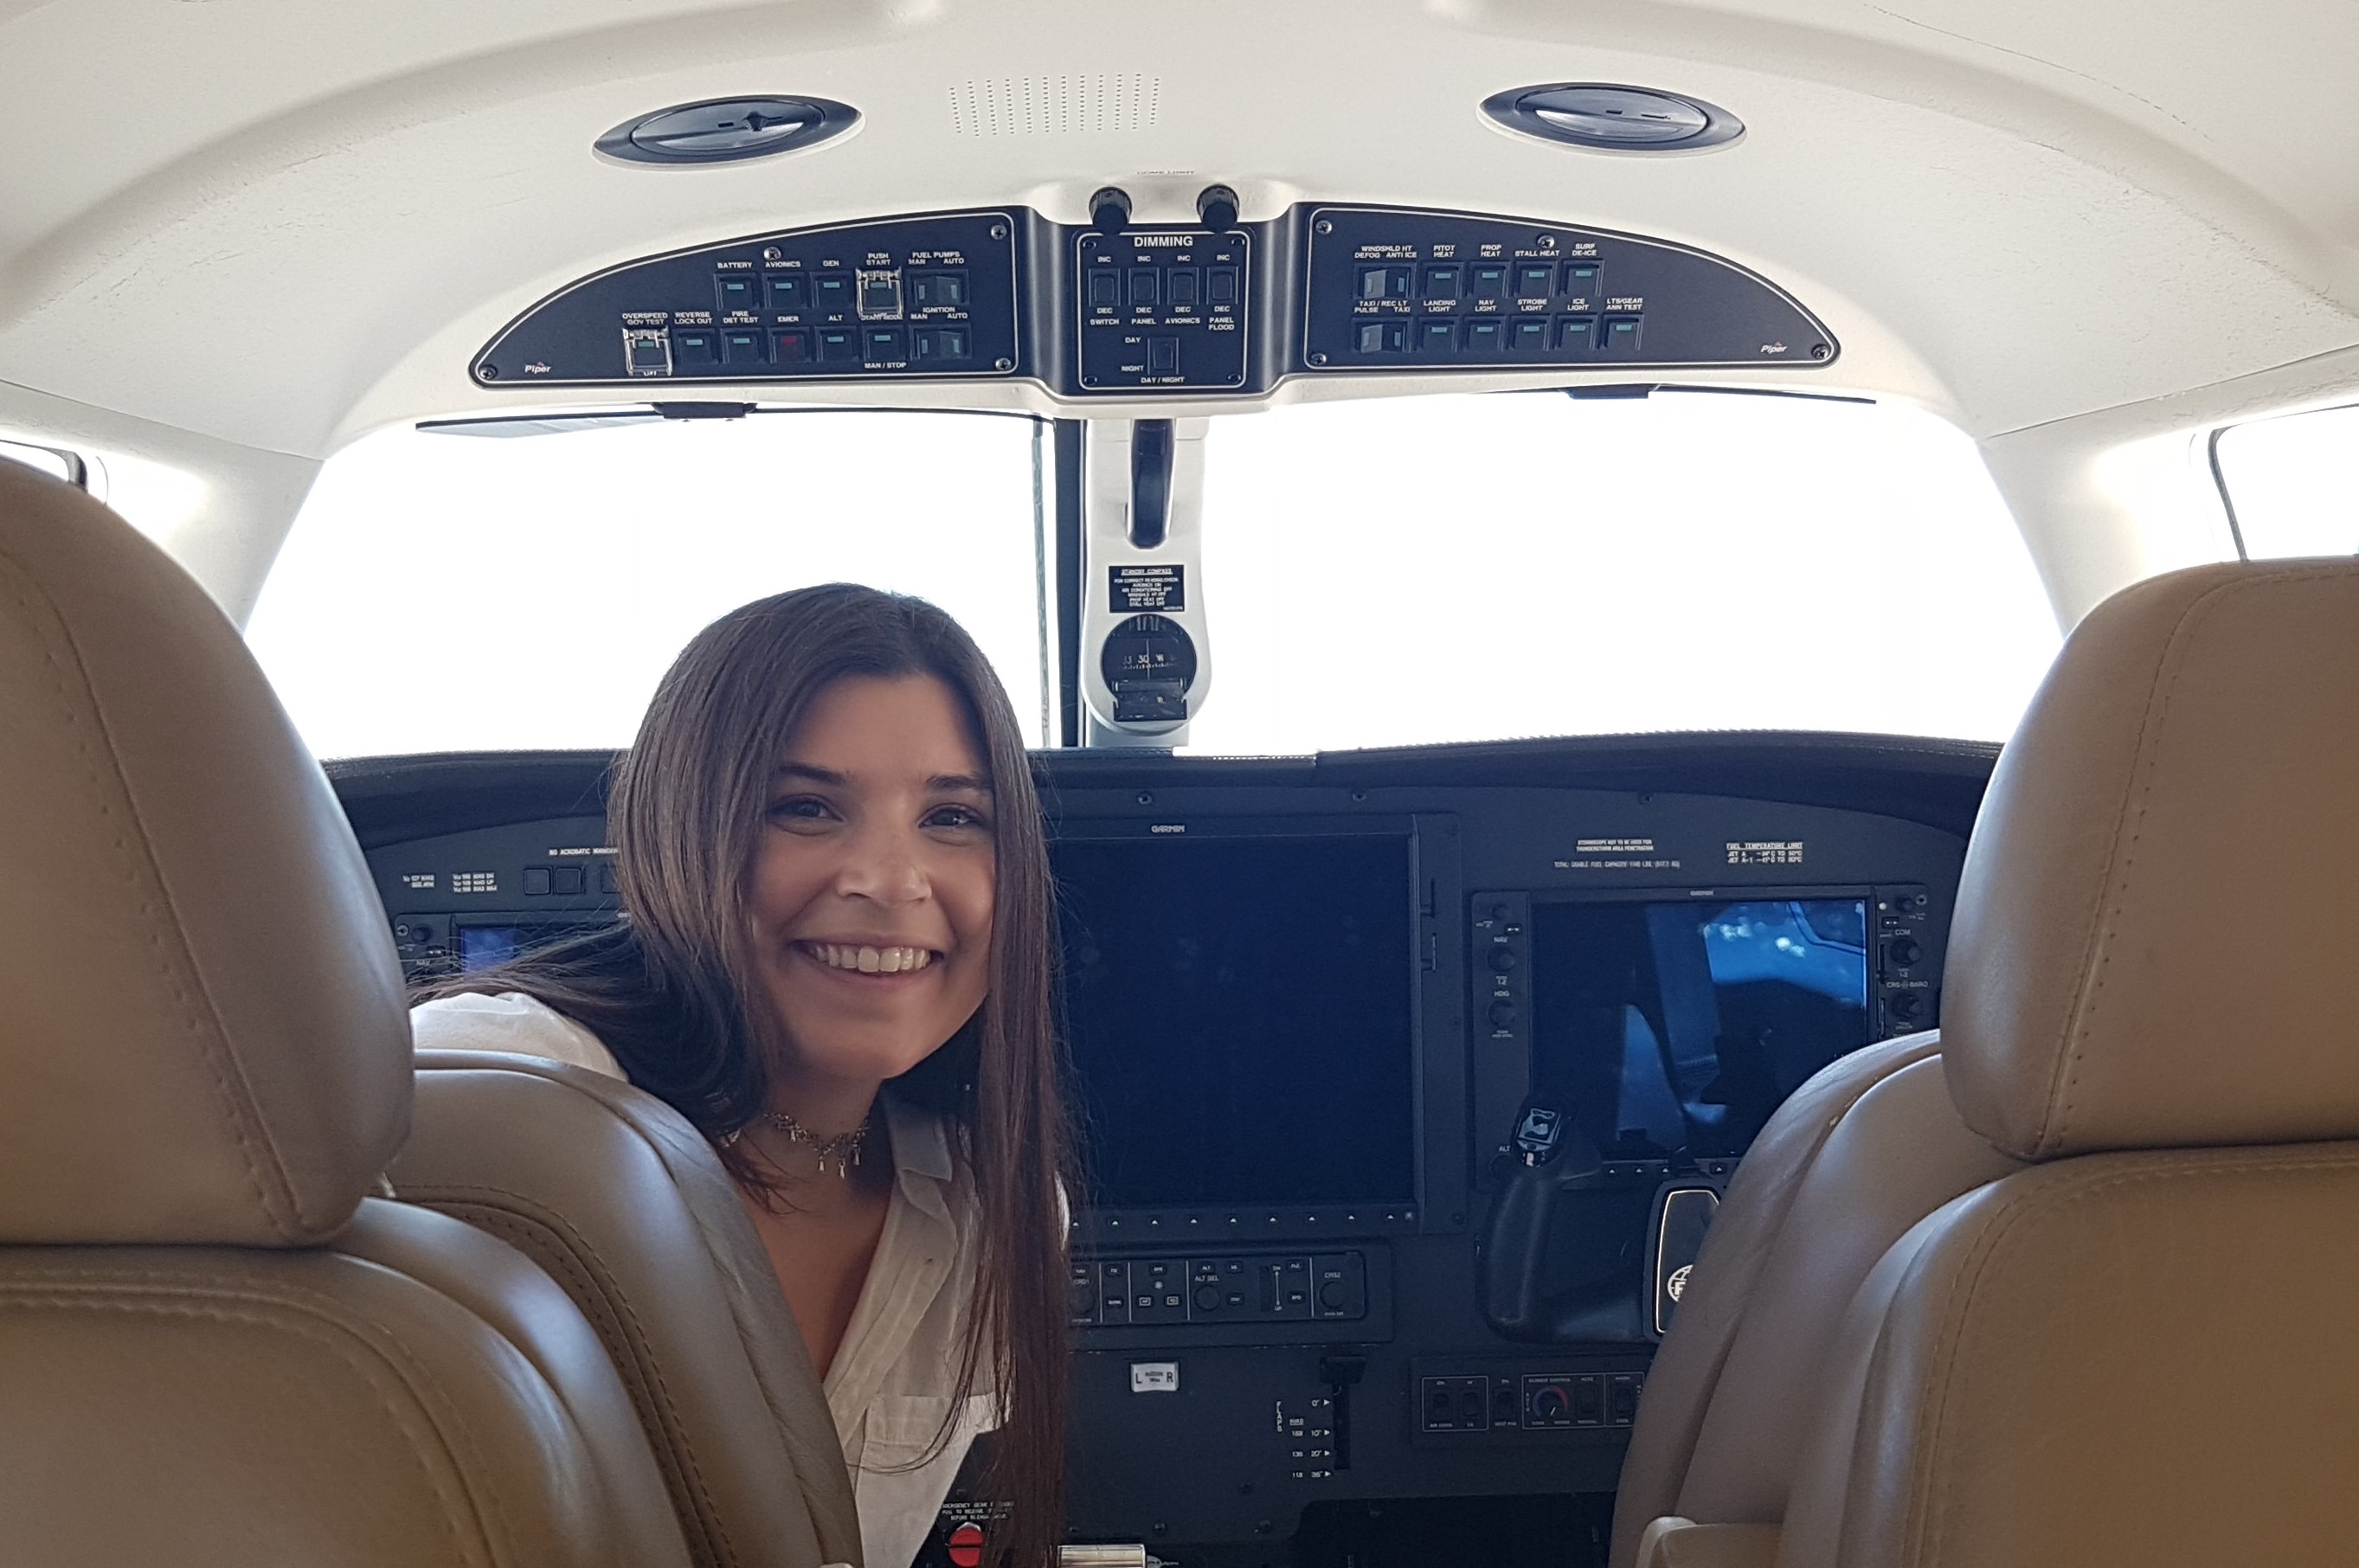 The first graduate of the new aerospace career in the country, will seek to improve her studies abroad, since there is still no such master's degree in Argentina